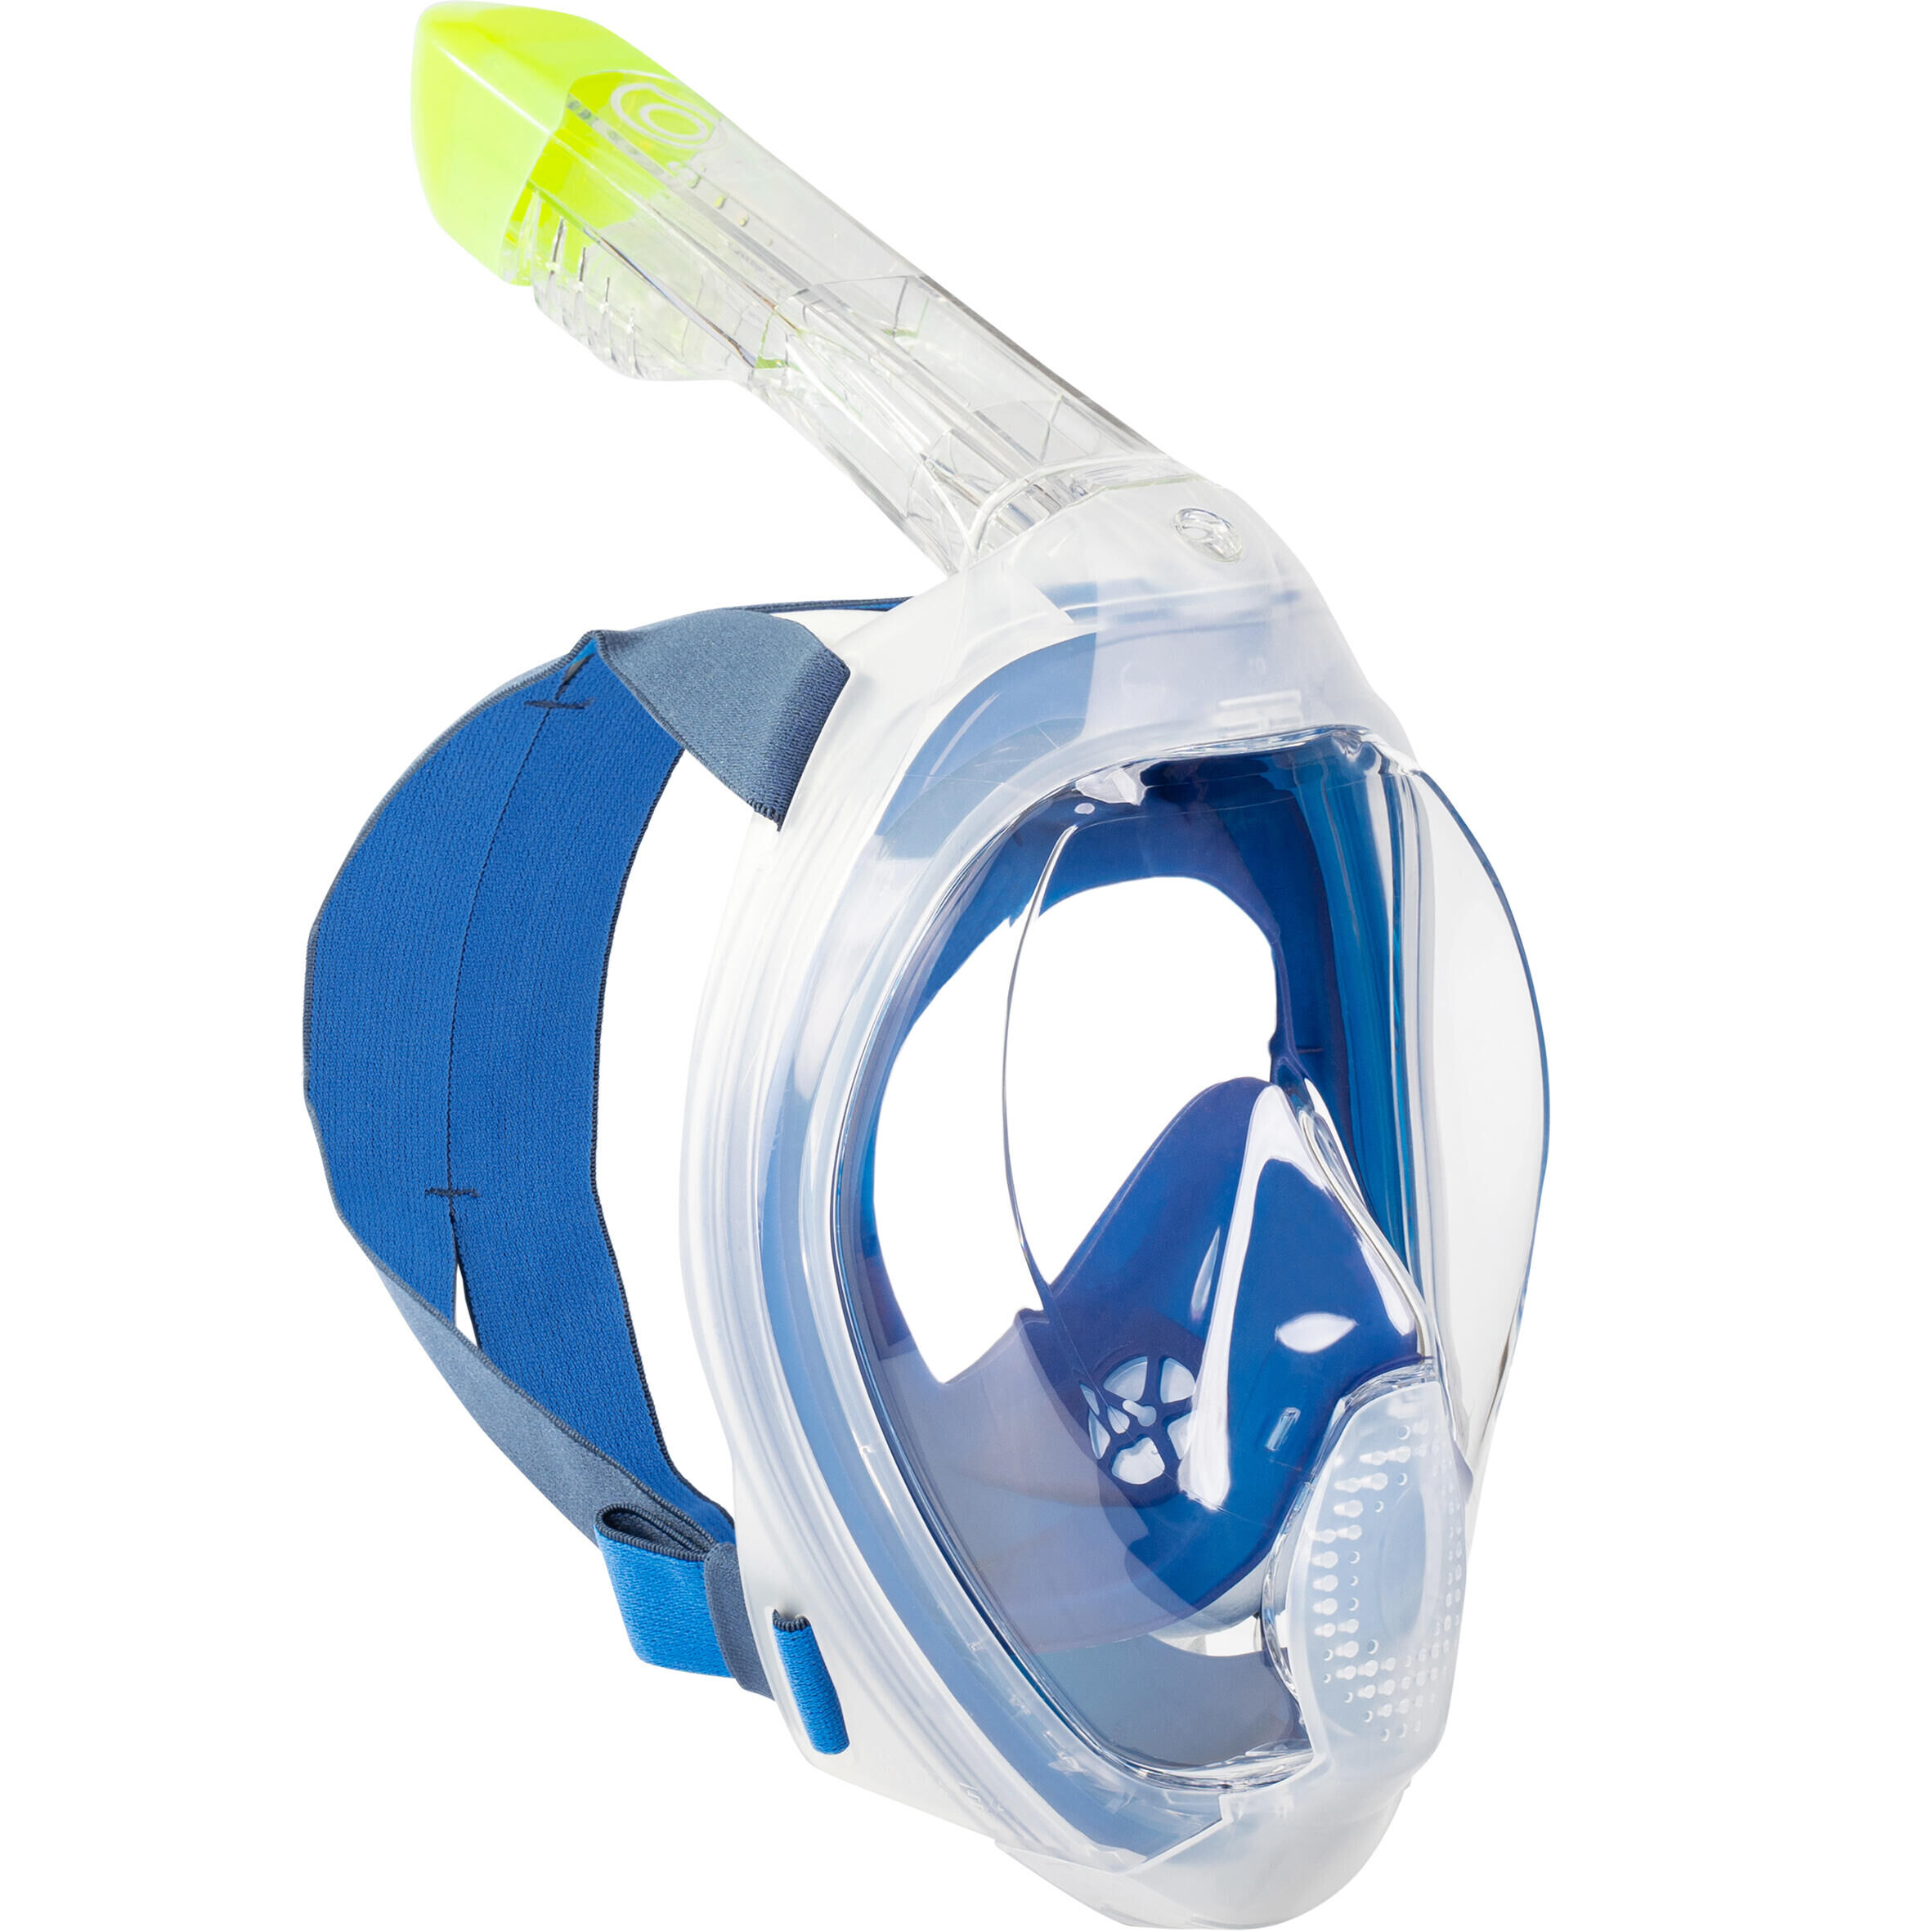 SUBEA Adult’s Easybreath surface mask with an acoustic valve - 540 freetalk blue